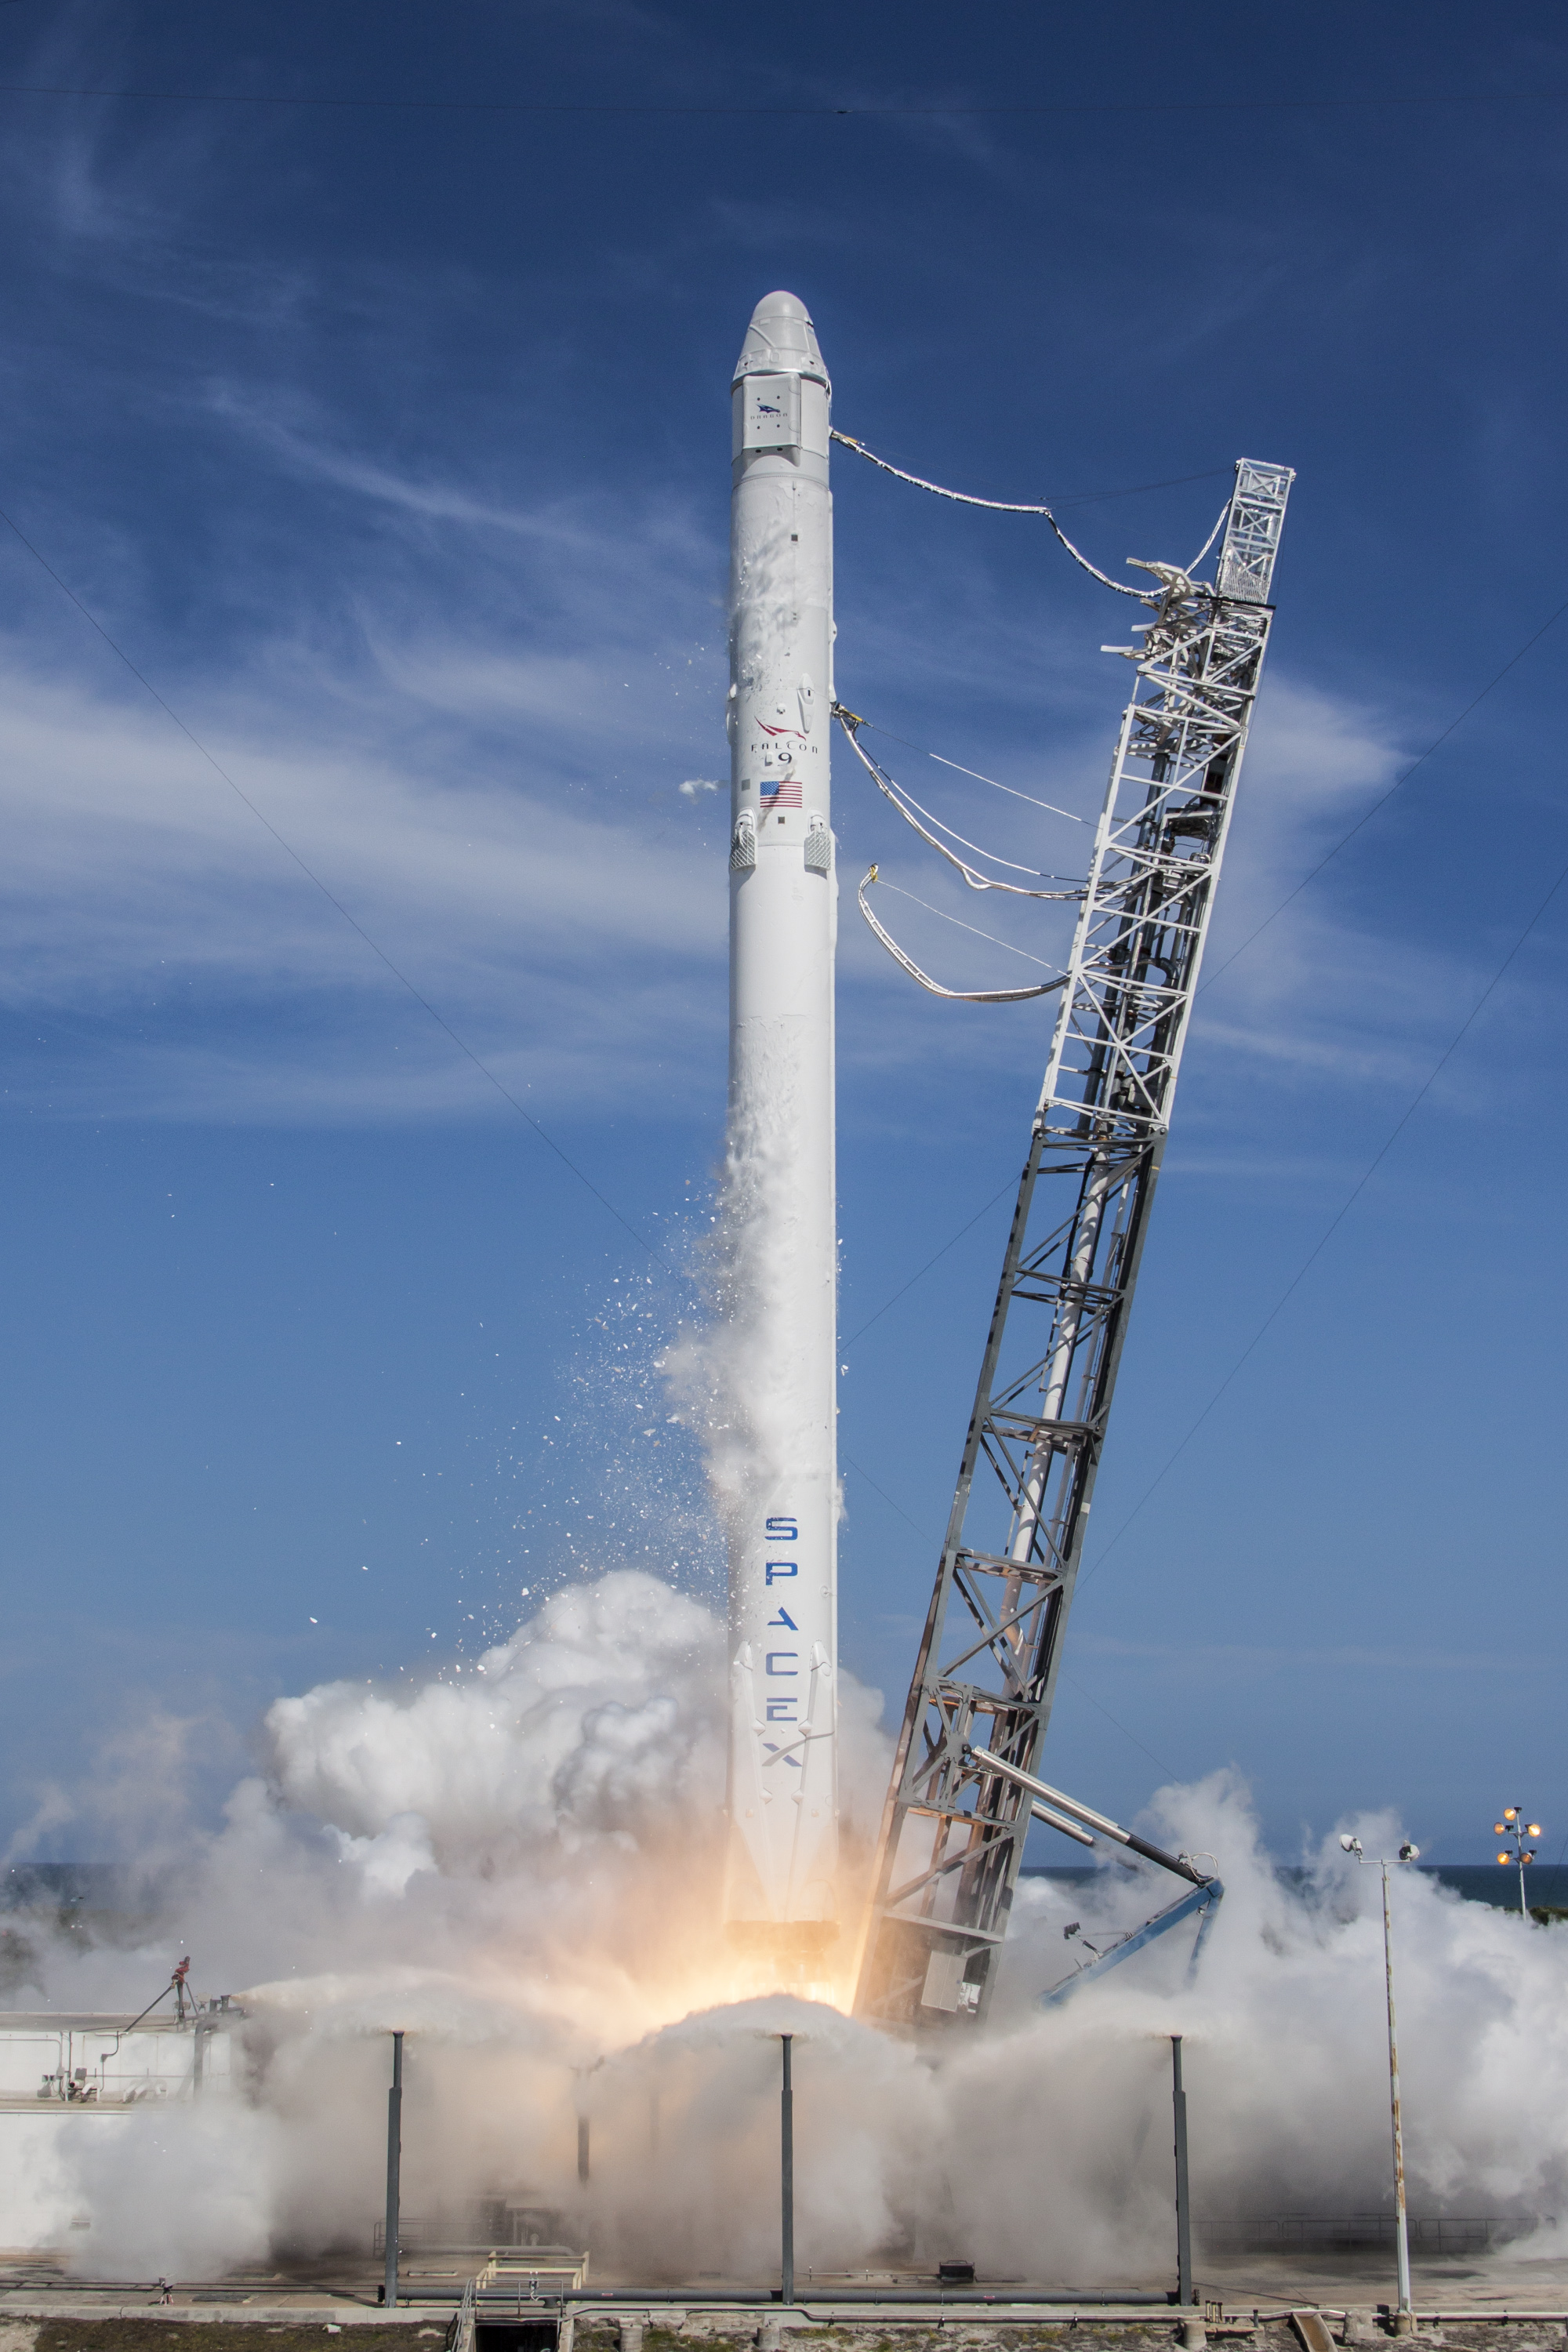 CRS6 launch. Photo by SpaceX. Used with permission.